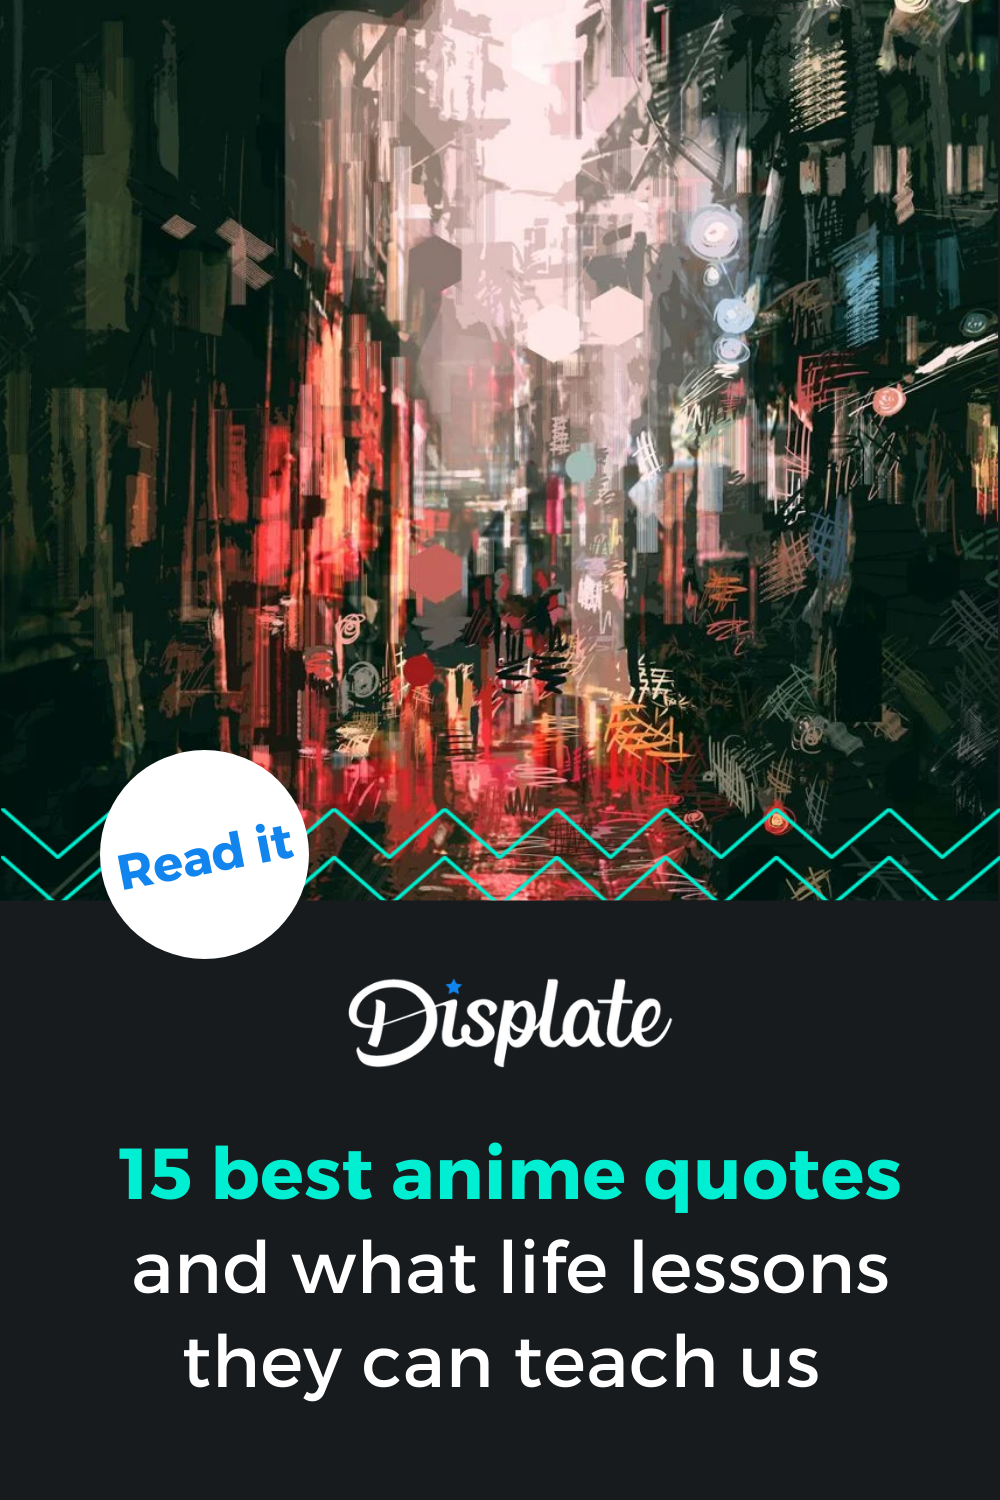 15 Best Anime Quotes About Life and Lessons They Can Teach Us